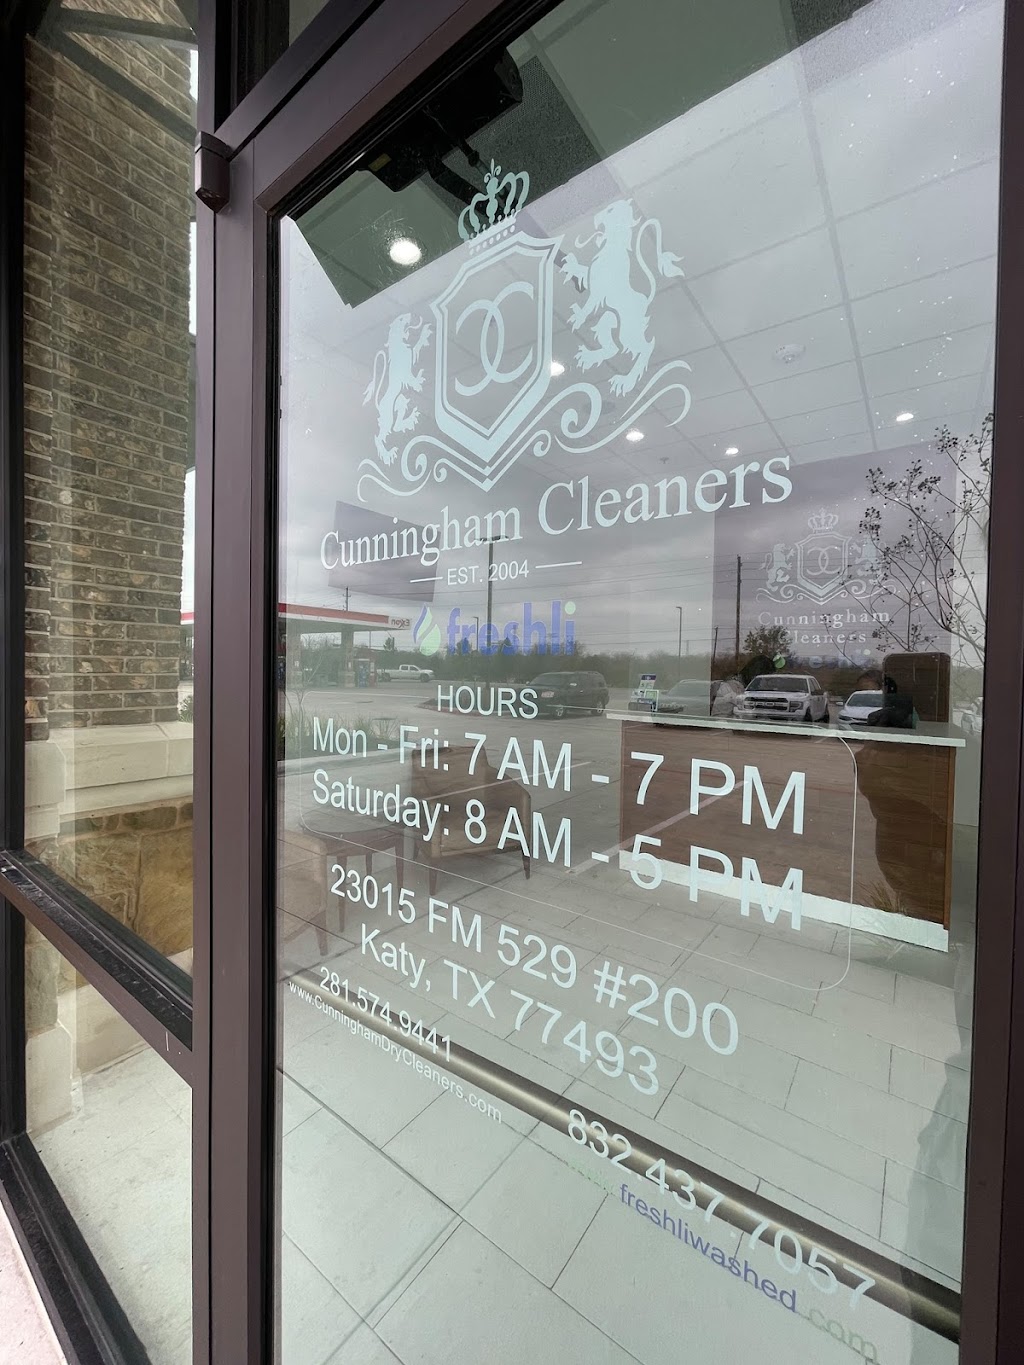 Cunningham Cleaners | 23015 Farm to Market Rd 529 Unit 200, Katy, TX 77493, USA | Phone: (832) 728-2721